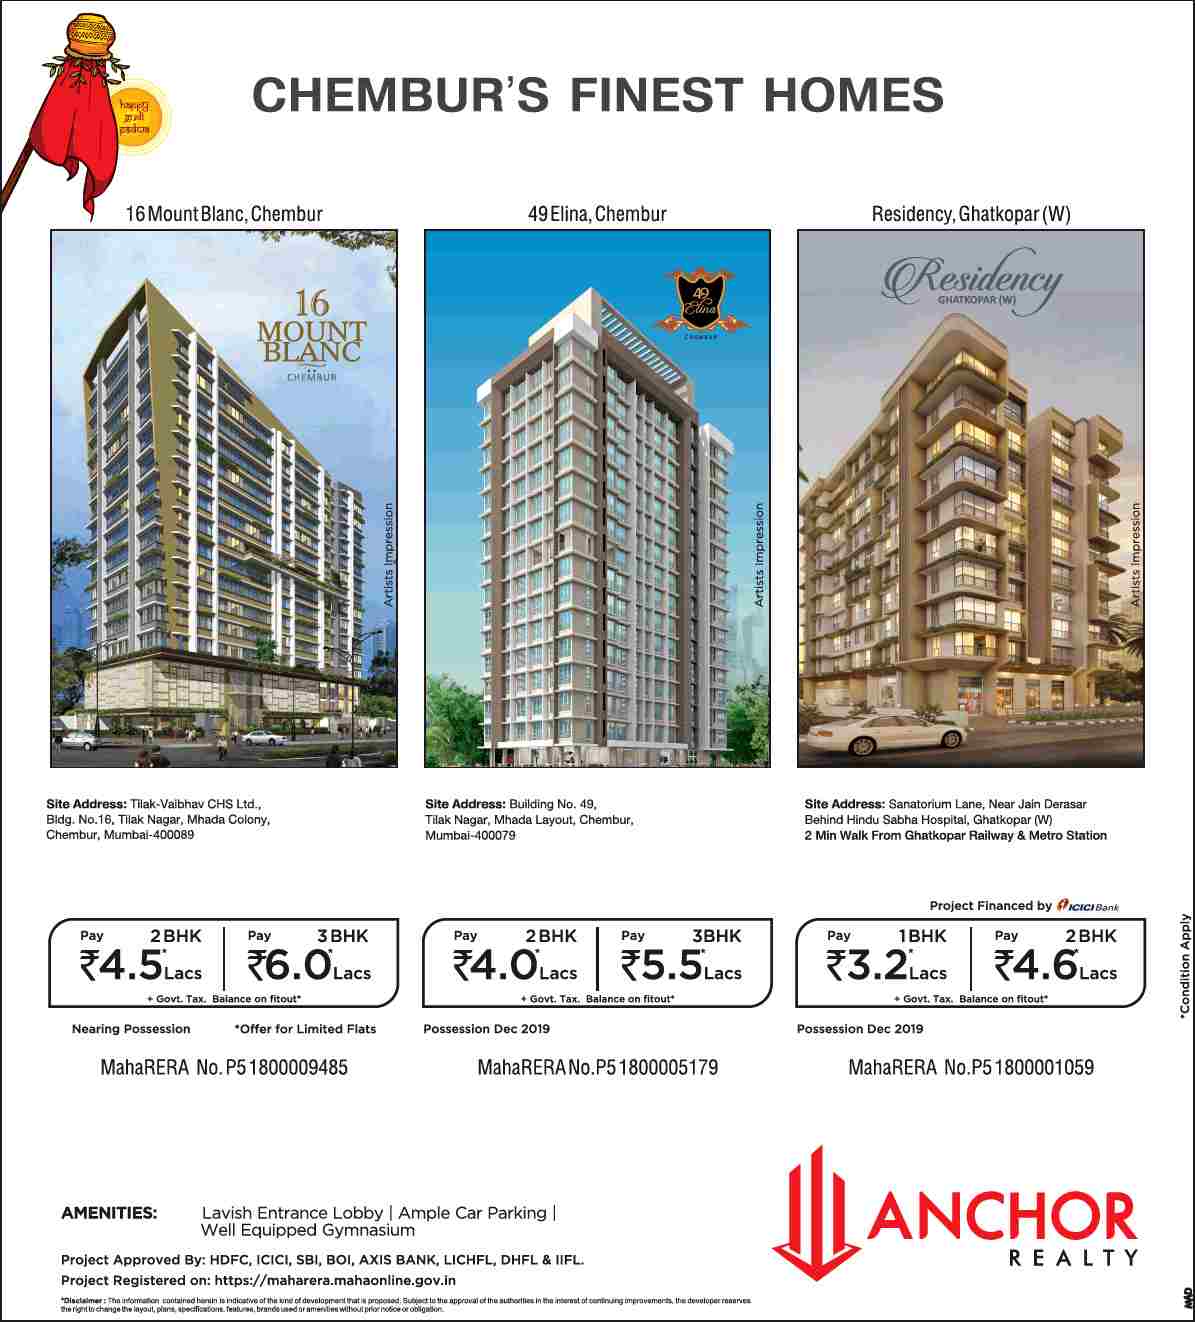 Invest in Chembur's finest homes by Anchor Realty